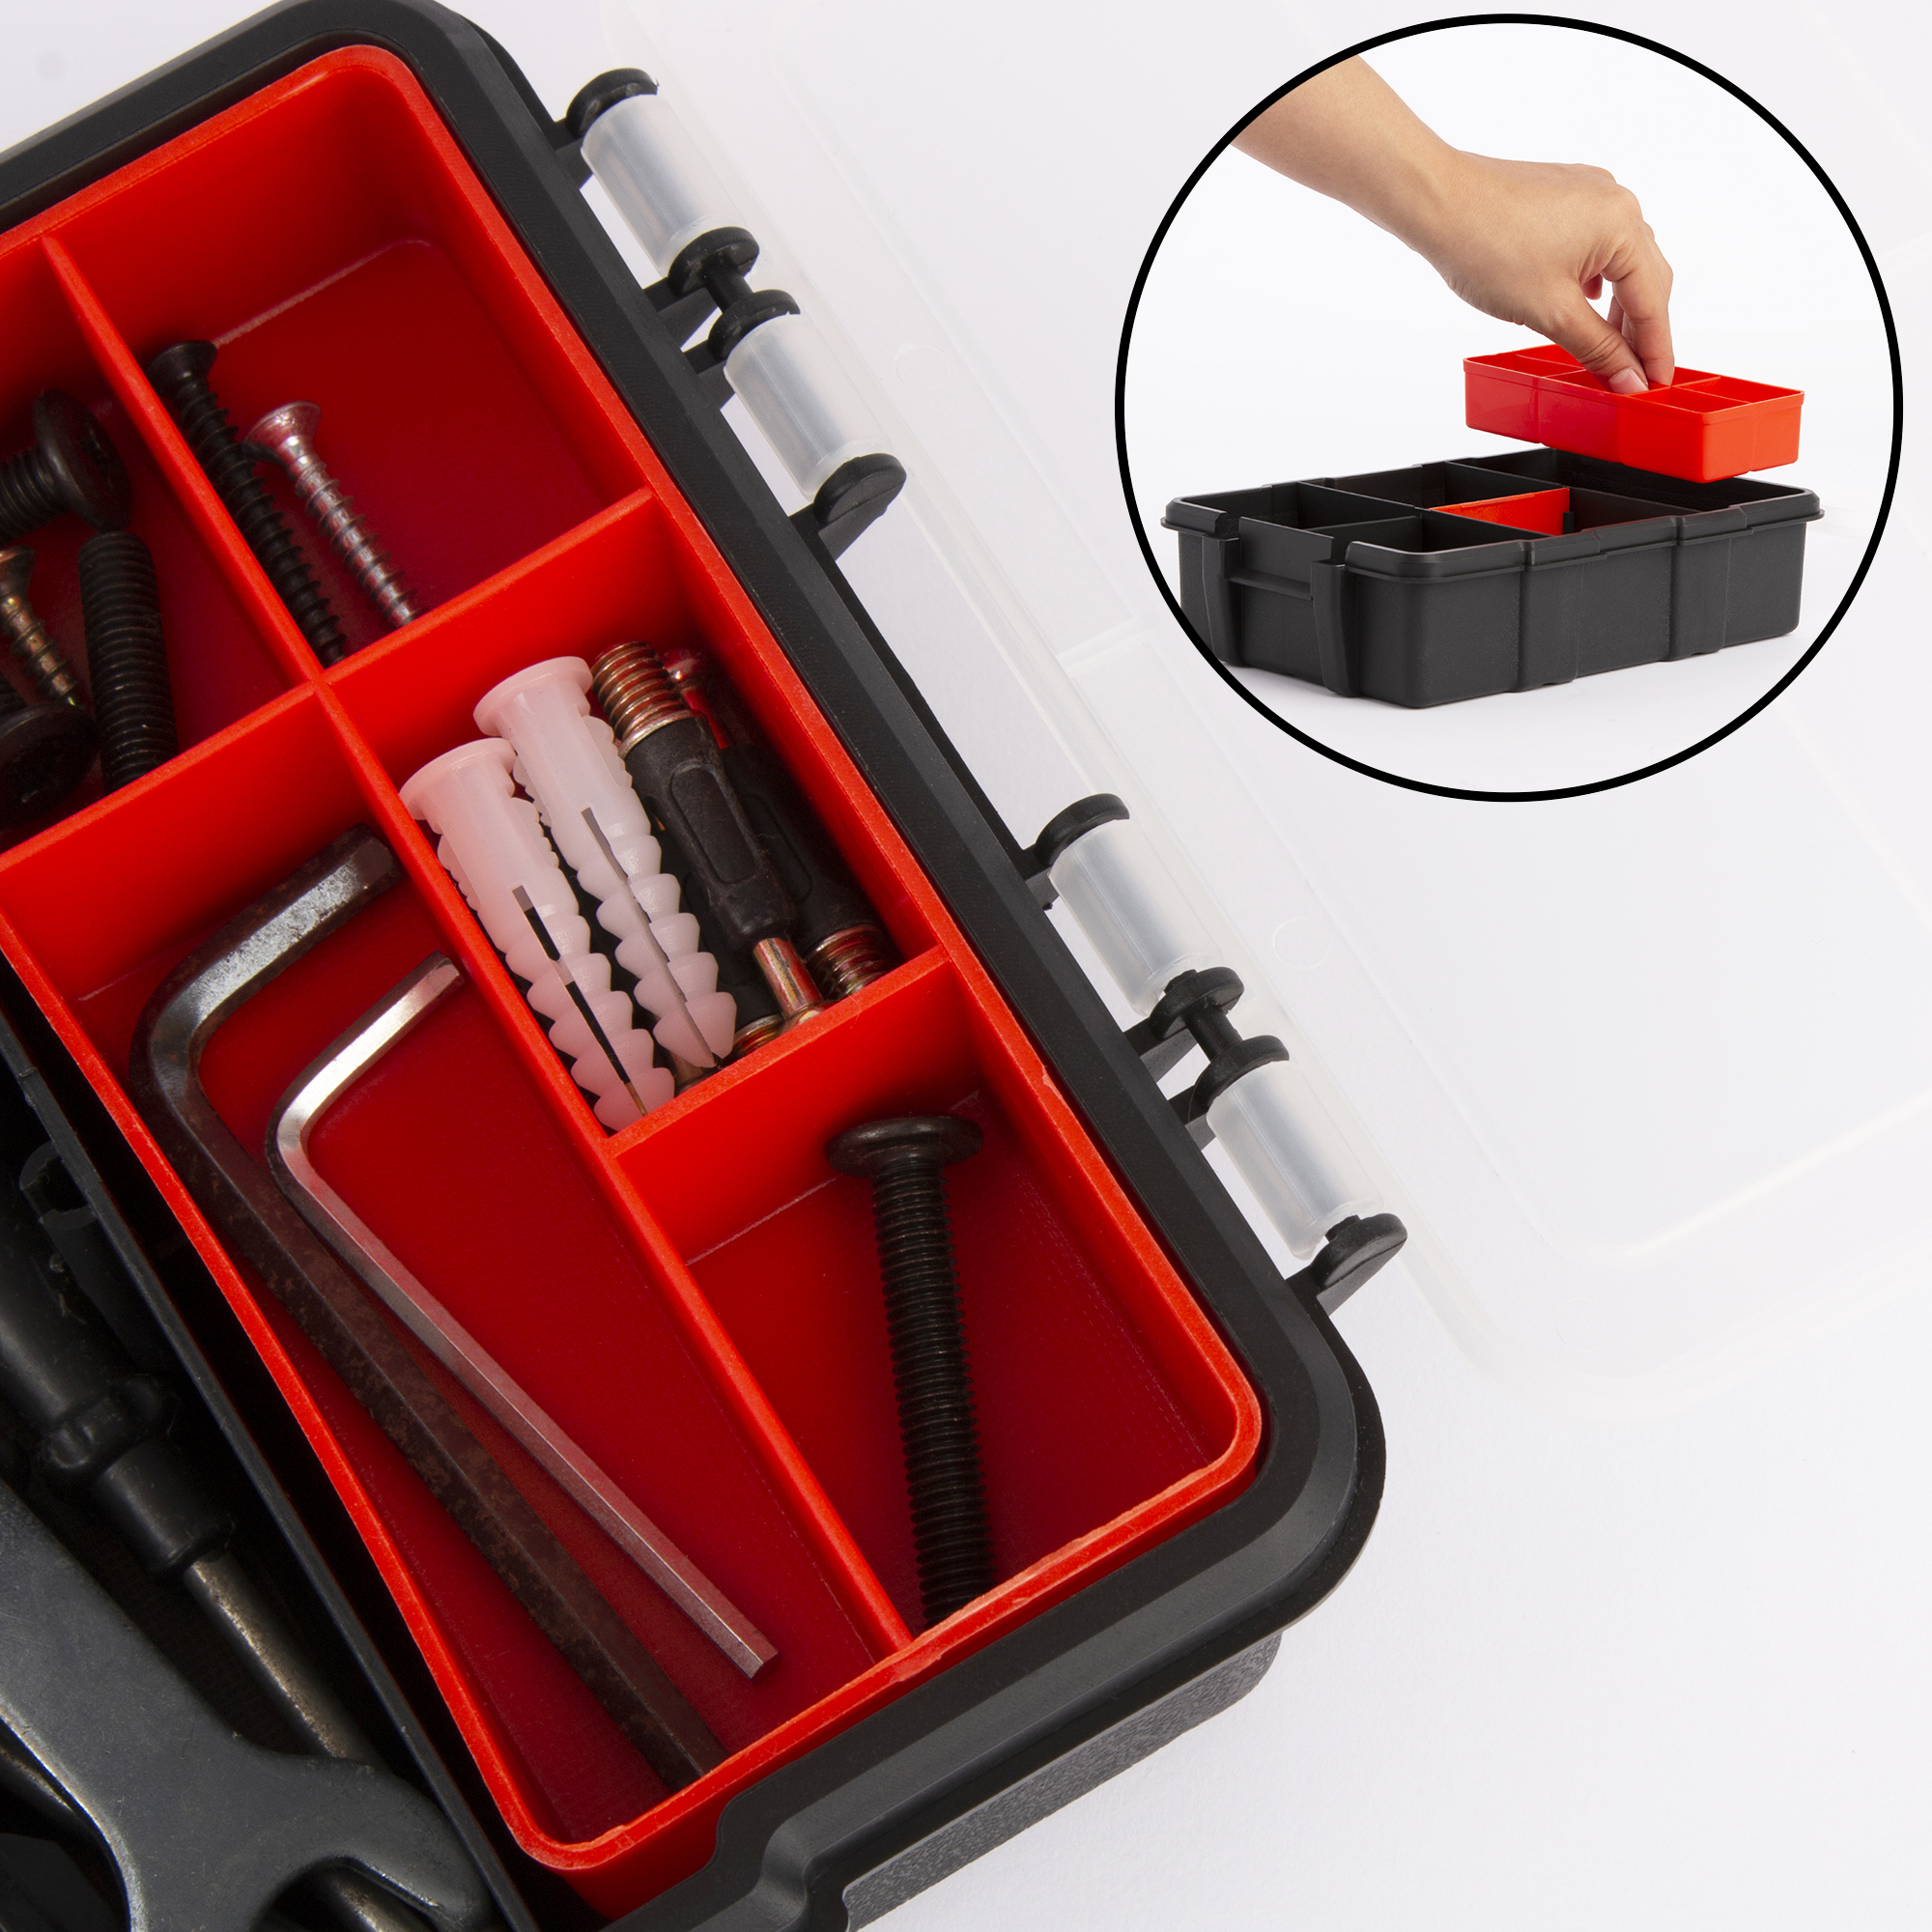 Tool Box Hardware Organizer, Portable Small Parts Storage Case, Plastic Tackle Container with Removable Divider, 8.9 inchx6.1 inchx2.3 inch, Size